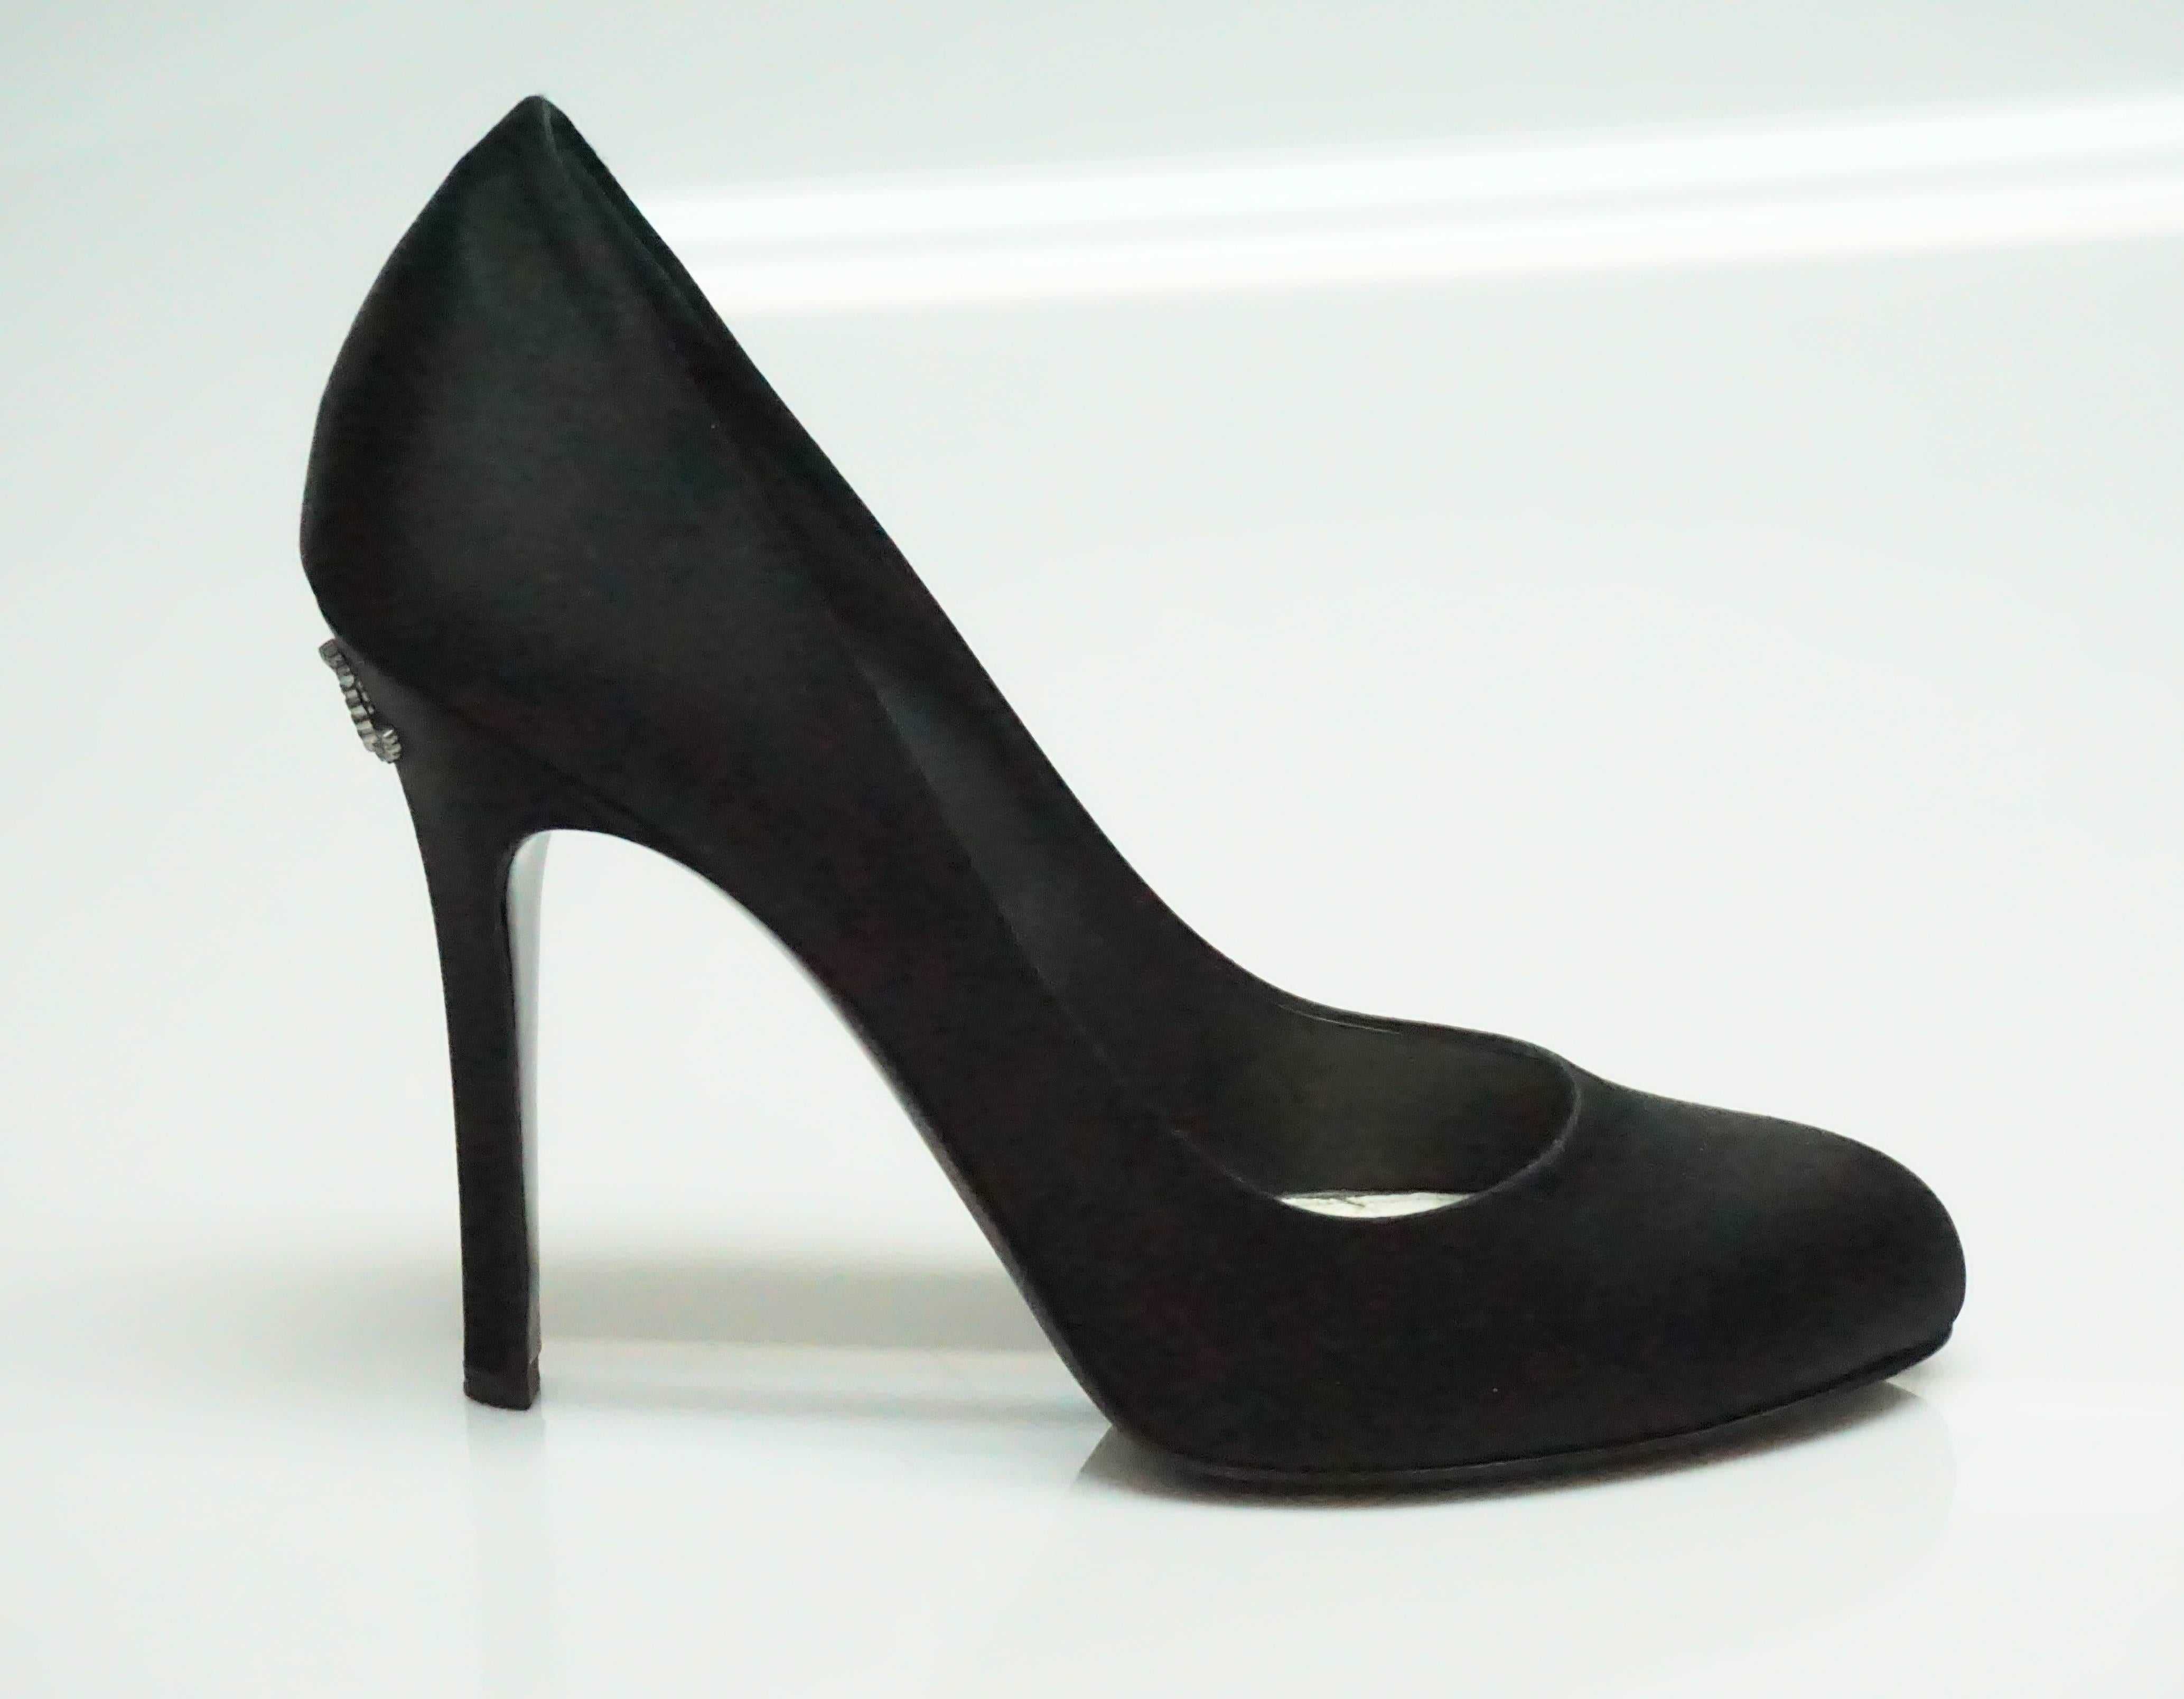 Chanel Black Satin Classic Pump w/ CC logo - 40.5  These beautiful pumps are in excellent condition. They have barely and wear to them.There is some discoloring on the soul of the shoe and there is some wear on the very bottom. 
Heel height: 4.5